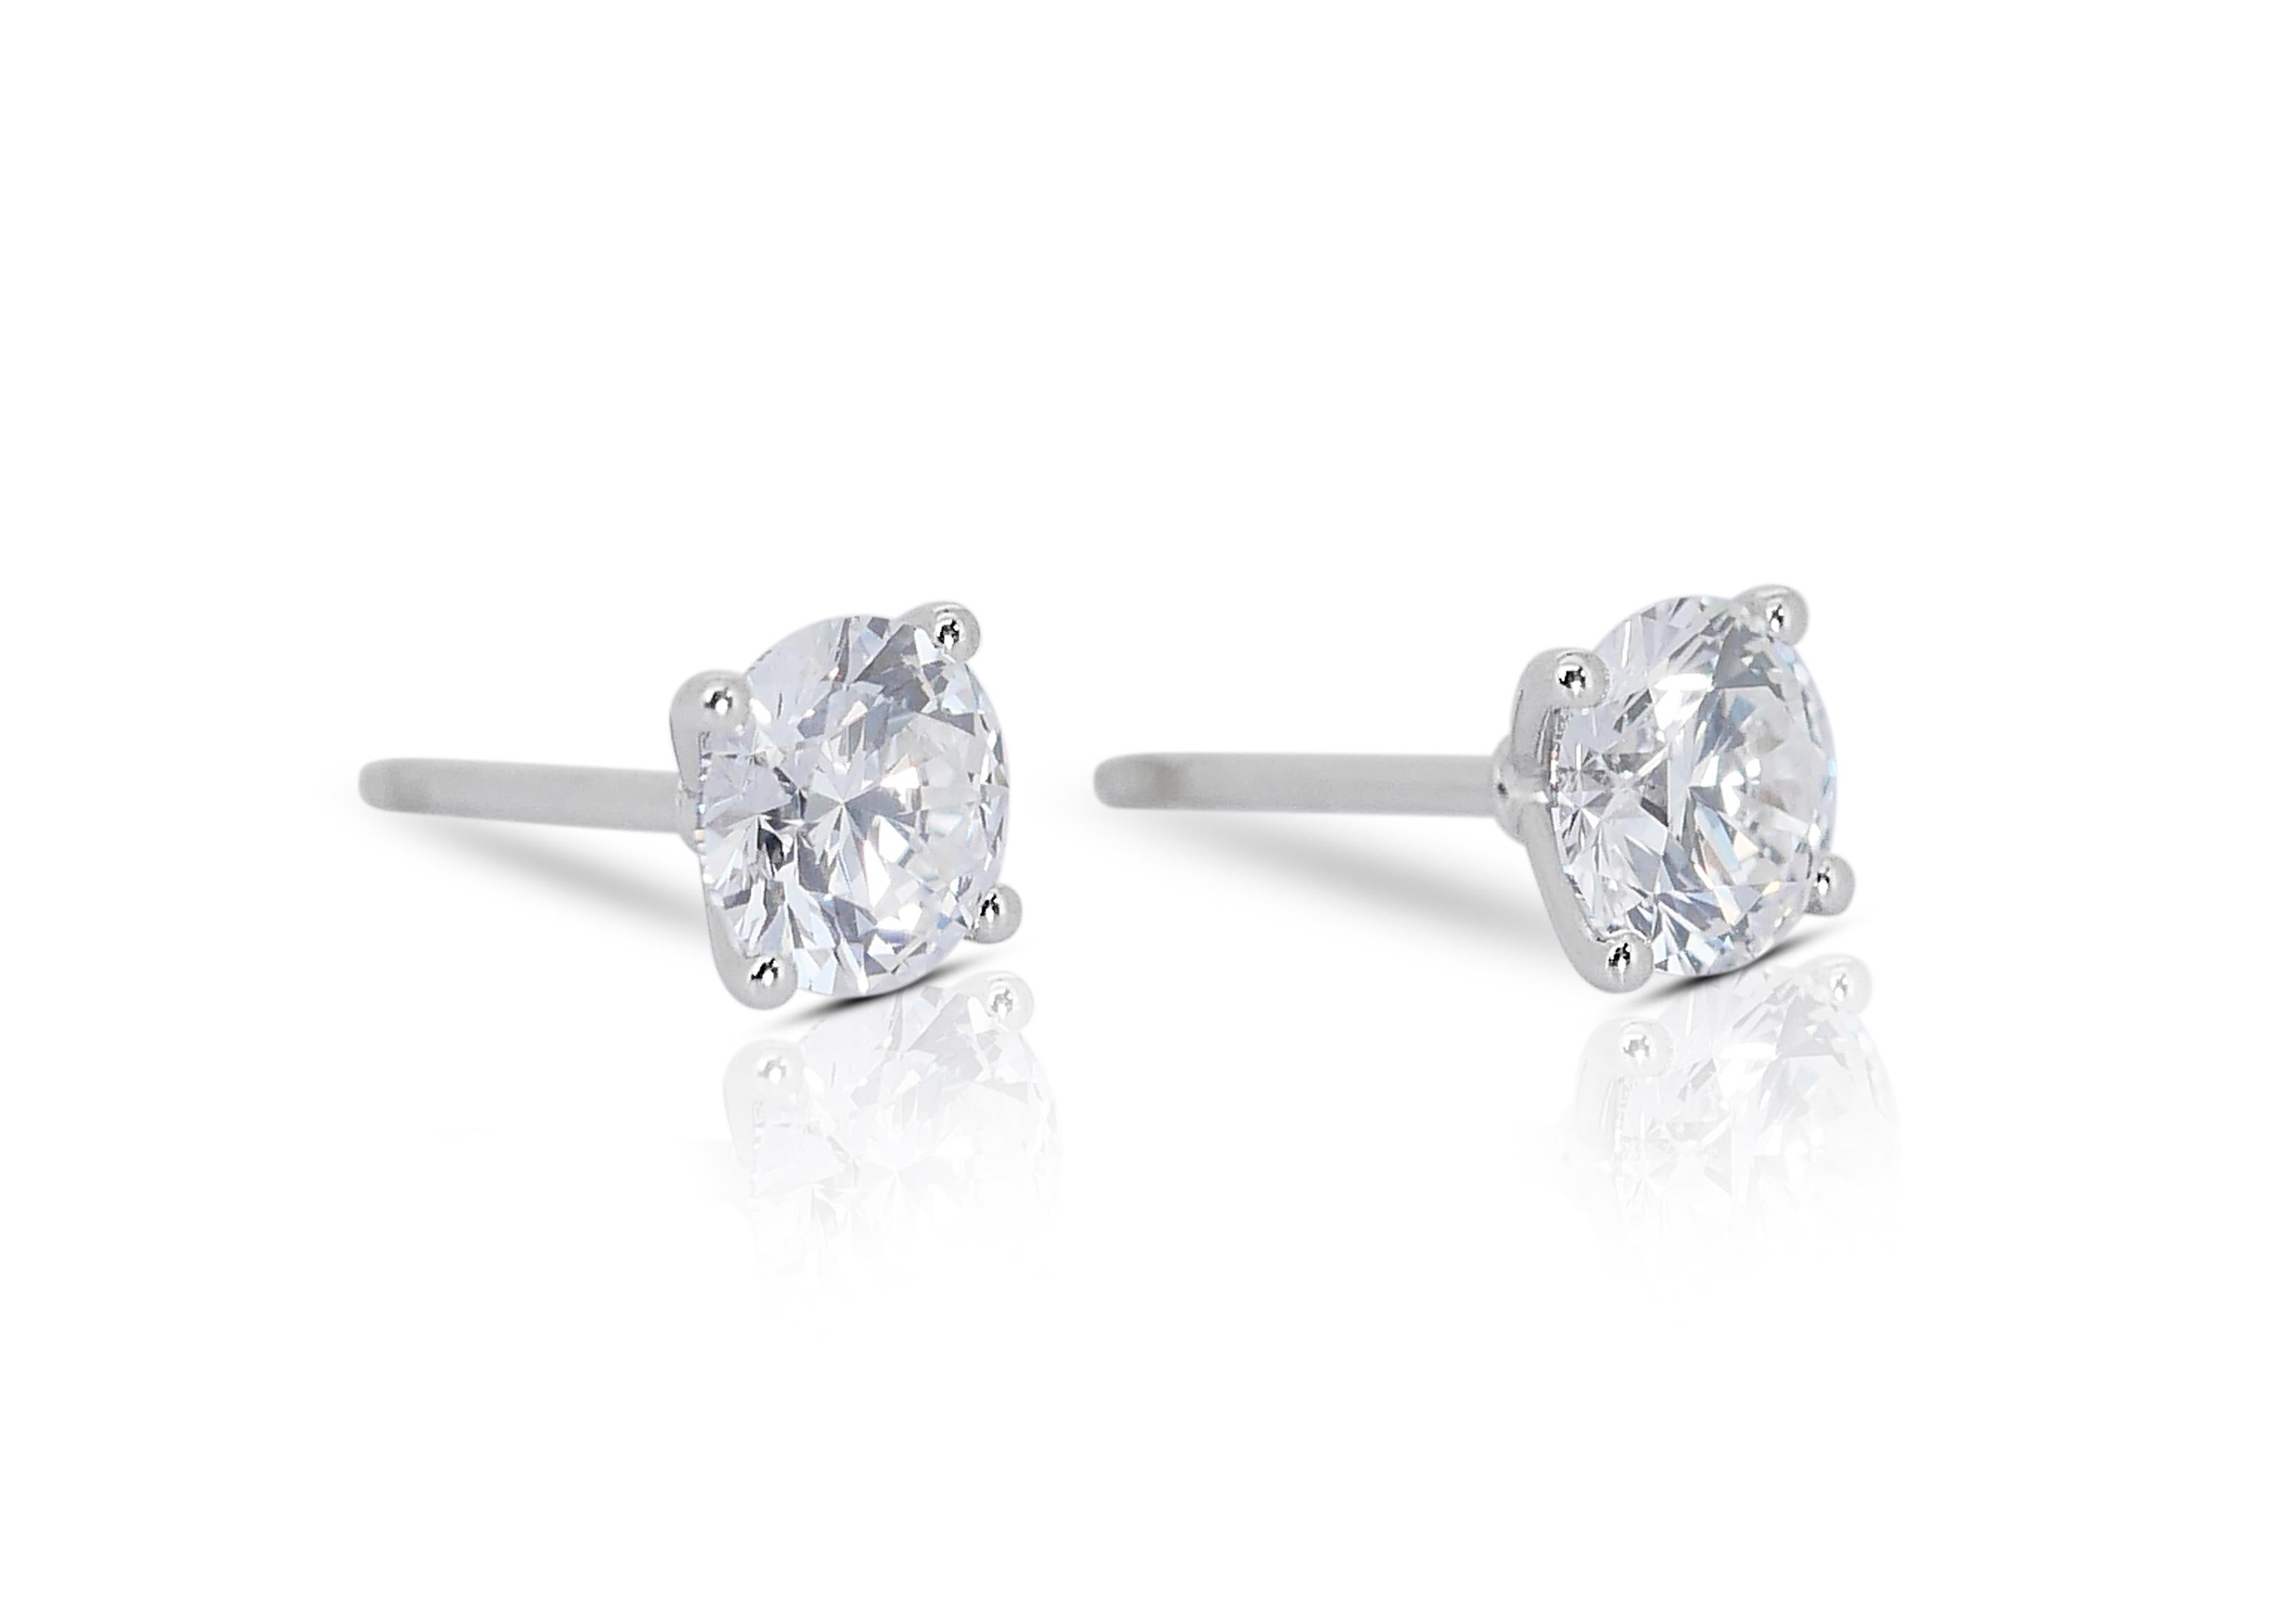 Spectacular 2.06ct Diamond Stud Earrings in 18k White Gold - GIA Certified For Sale 2